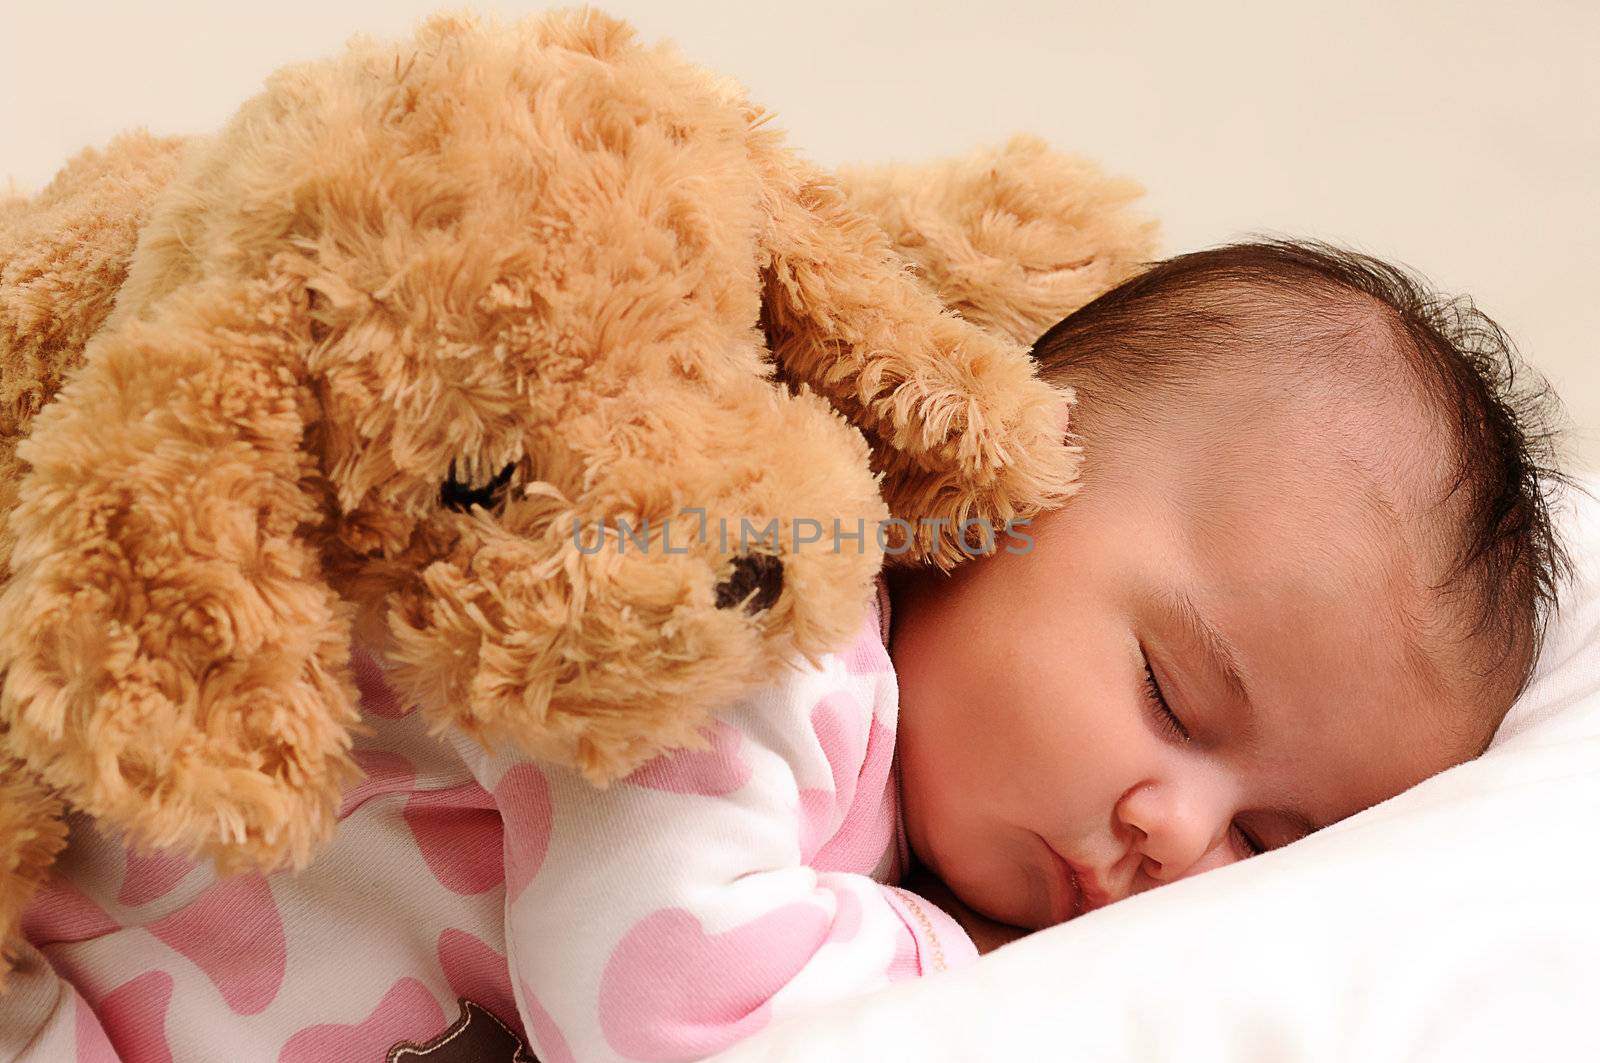 baby sleeps with brown toy dog on her back by Ansunette